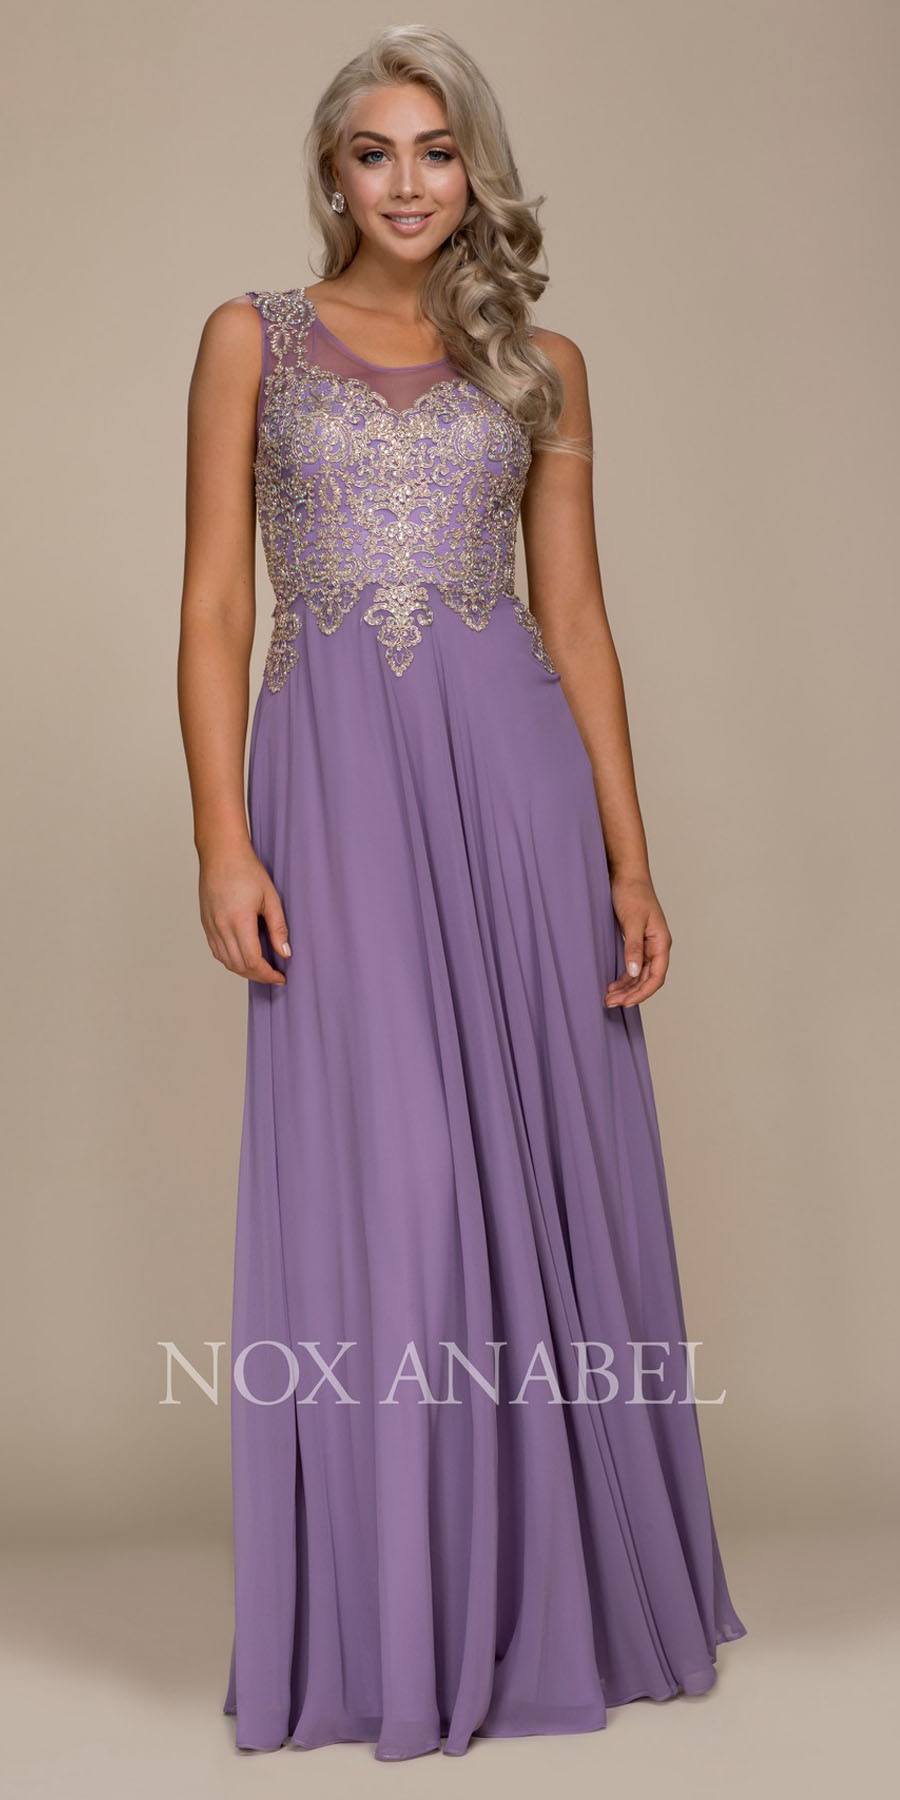 Sleeveless Long Formal Dress Embroidered Bodice L.Plum-Silver